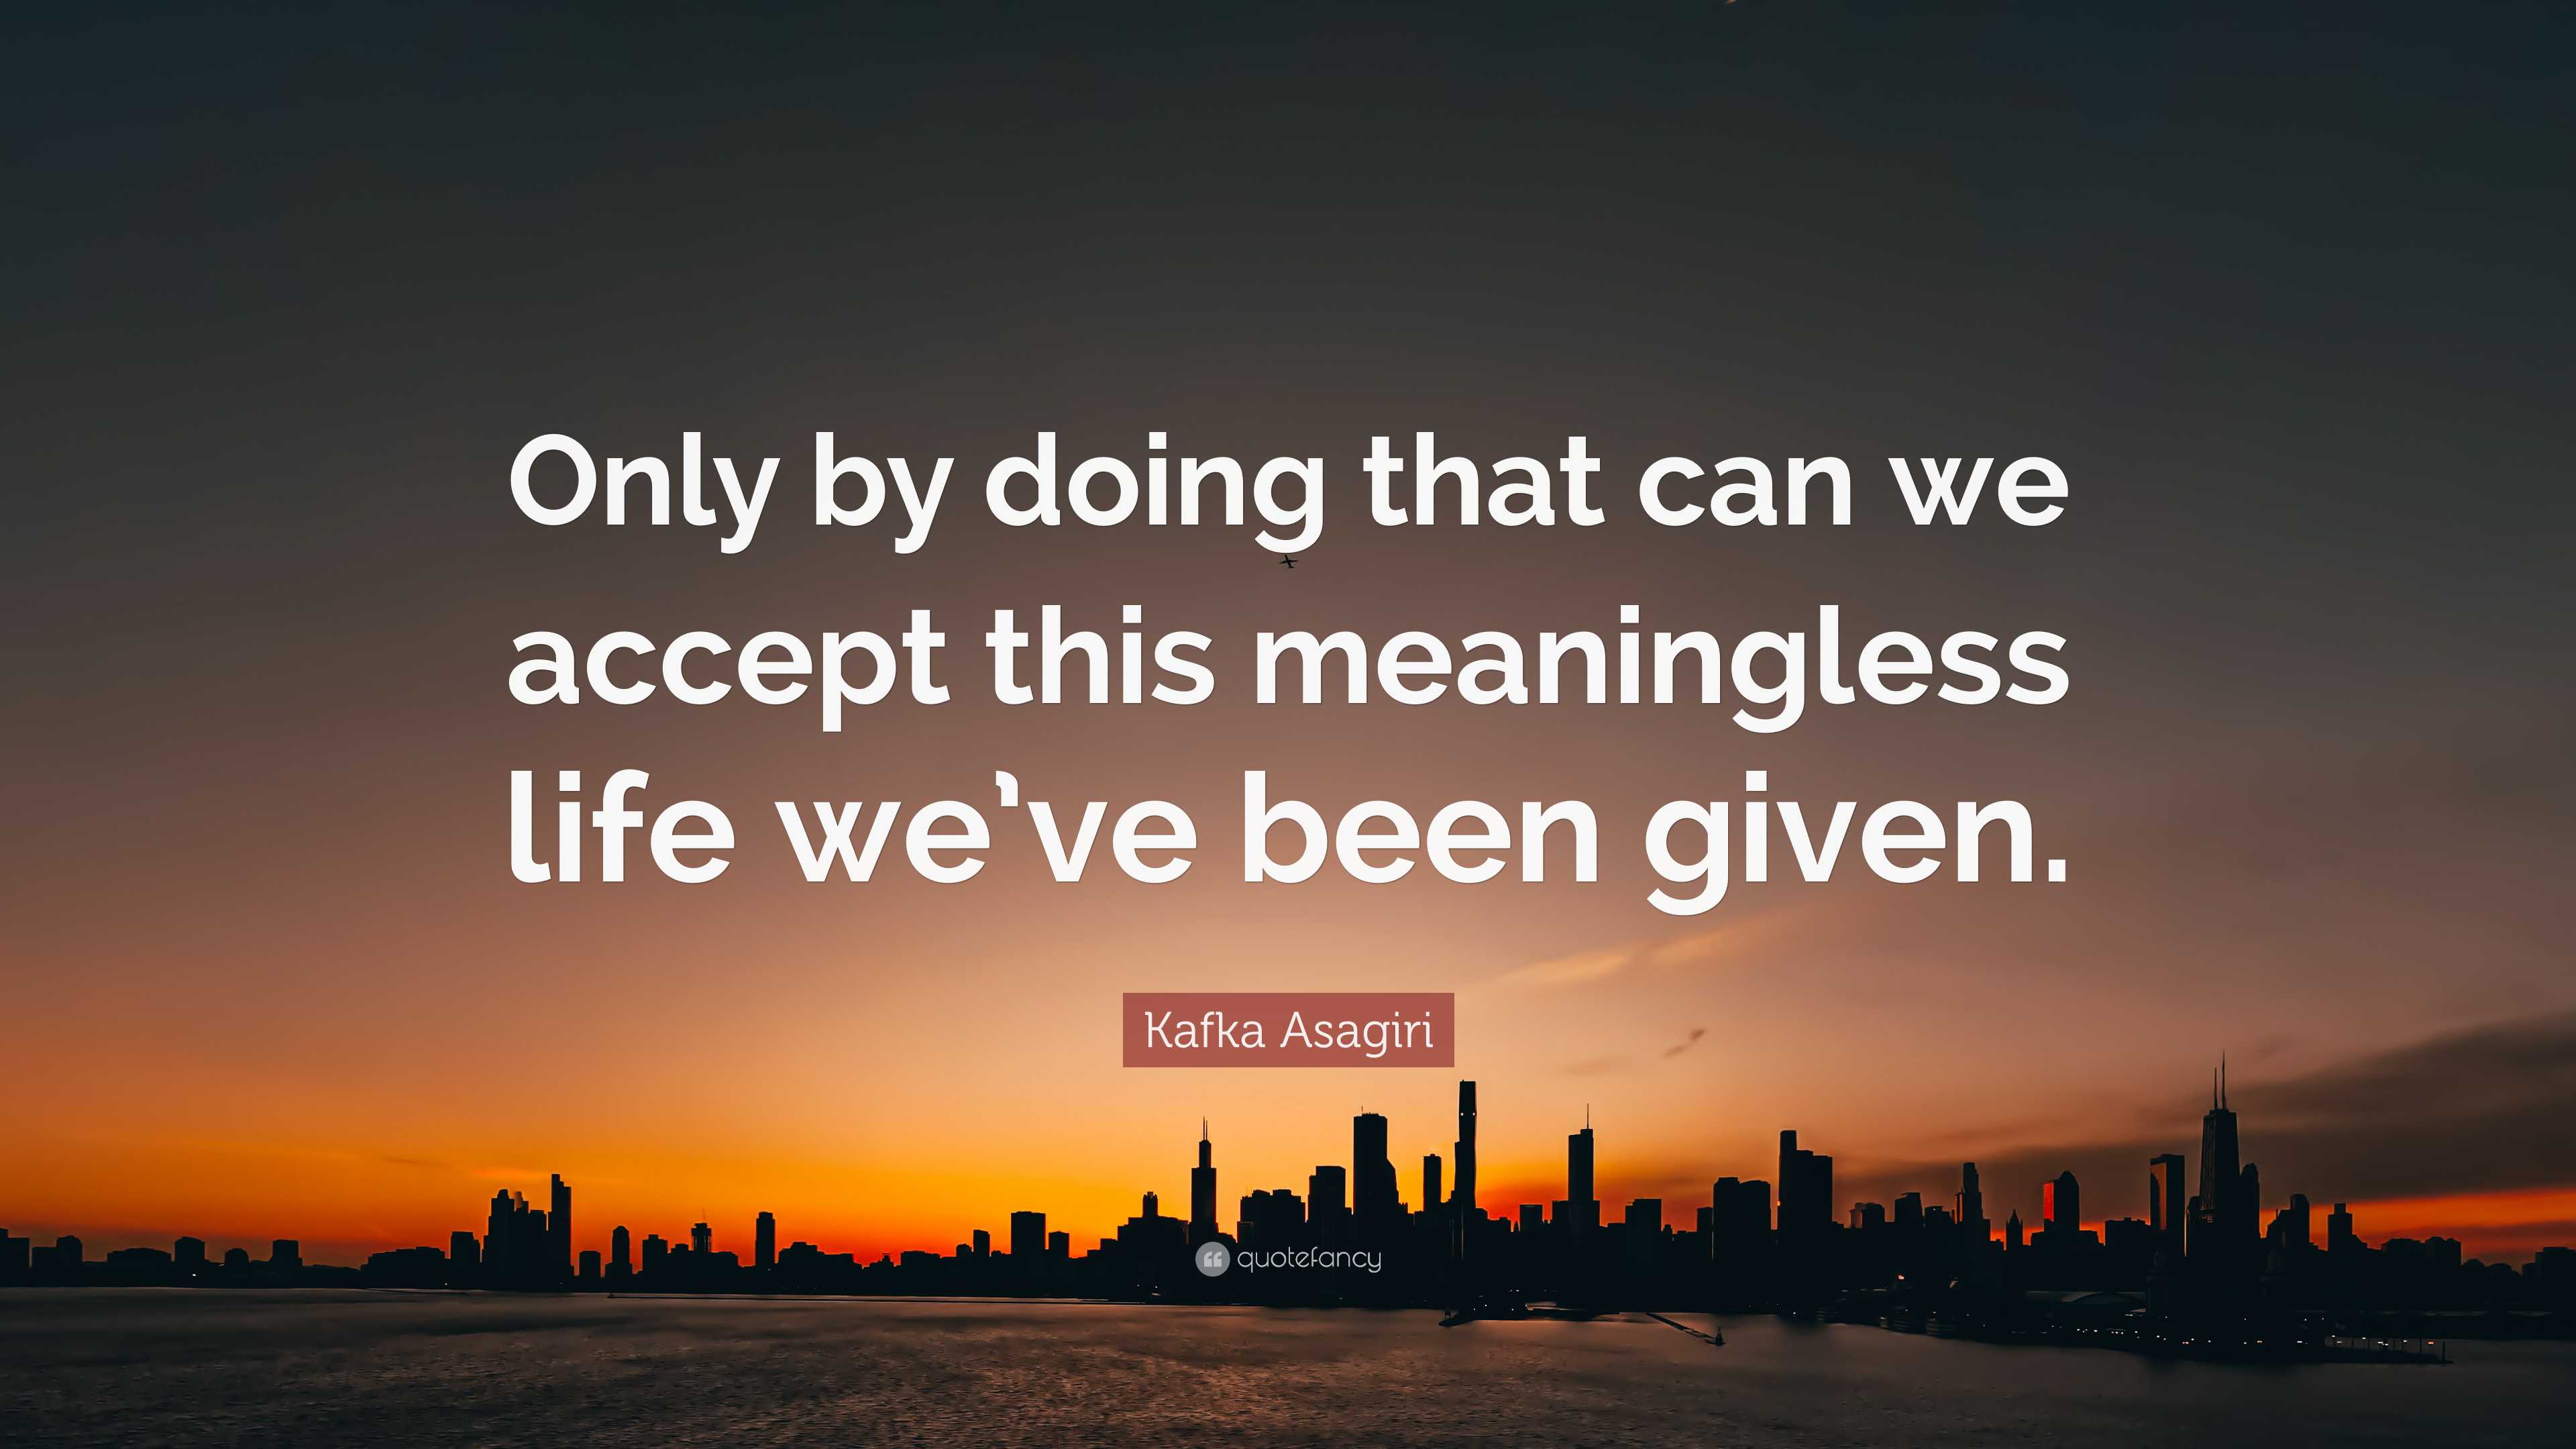 Kafka Asagiri Quote: “Only by doing that can we accept this meaningless ...